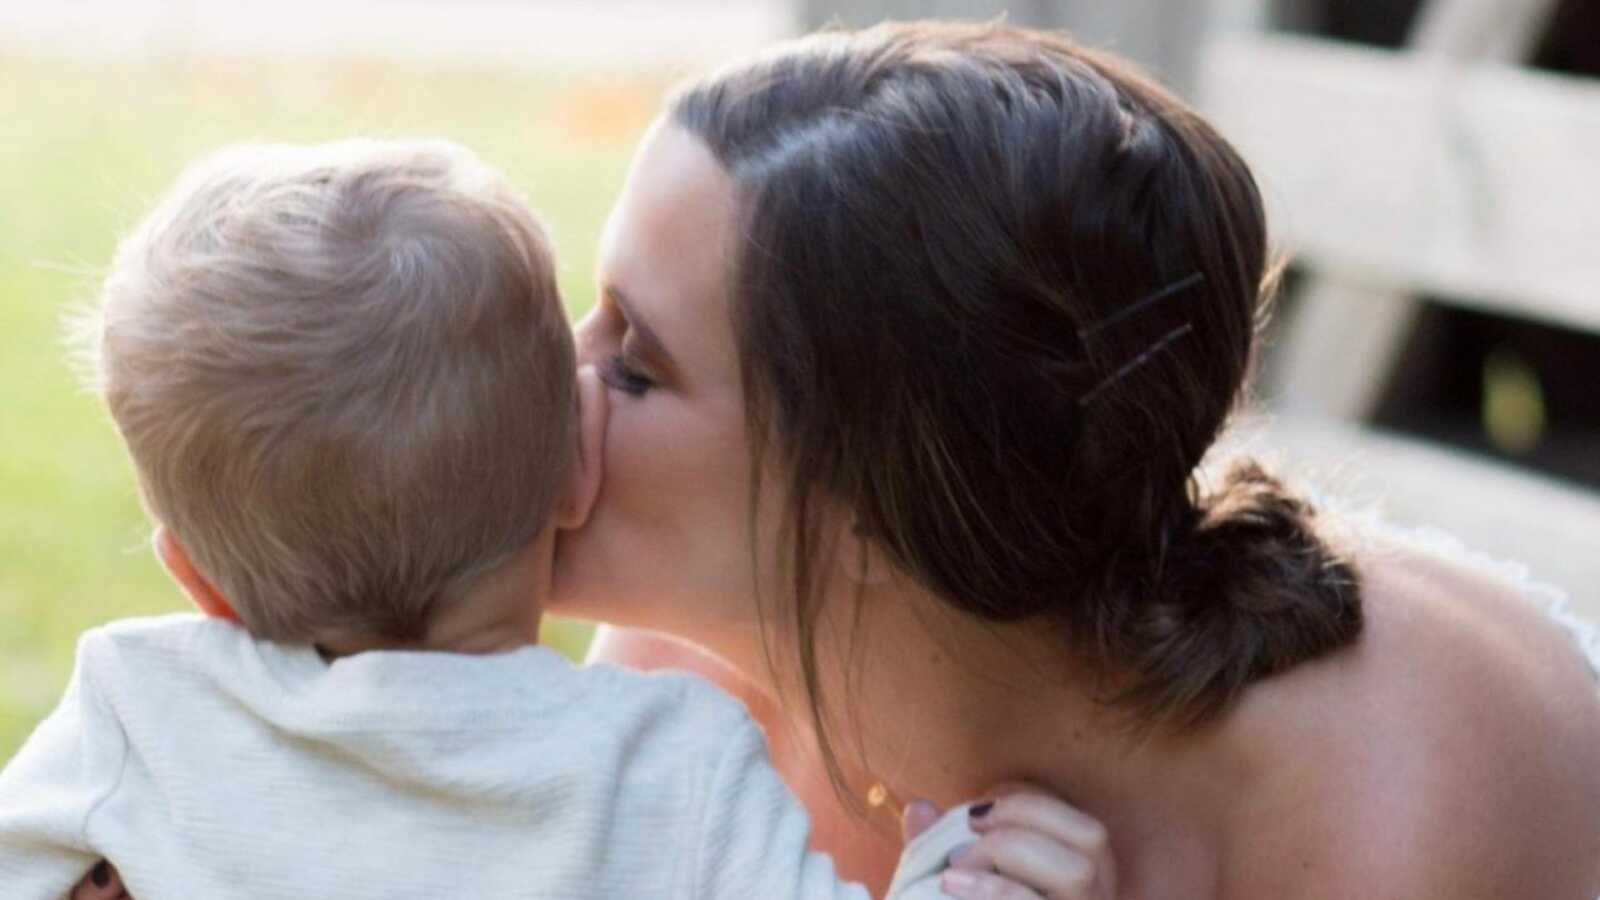 Mom of two kisses her firstborn son on the cheek during a family photoshoot